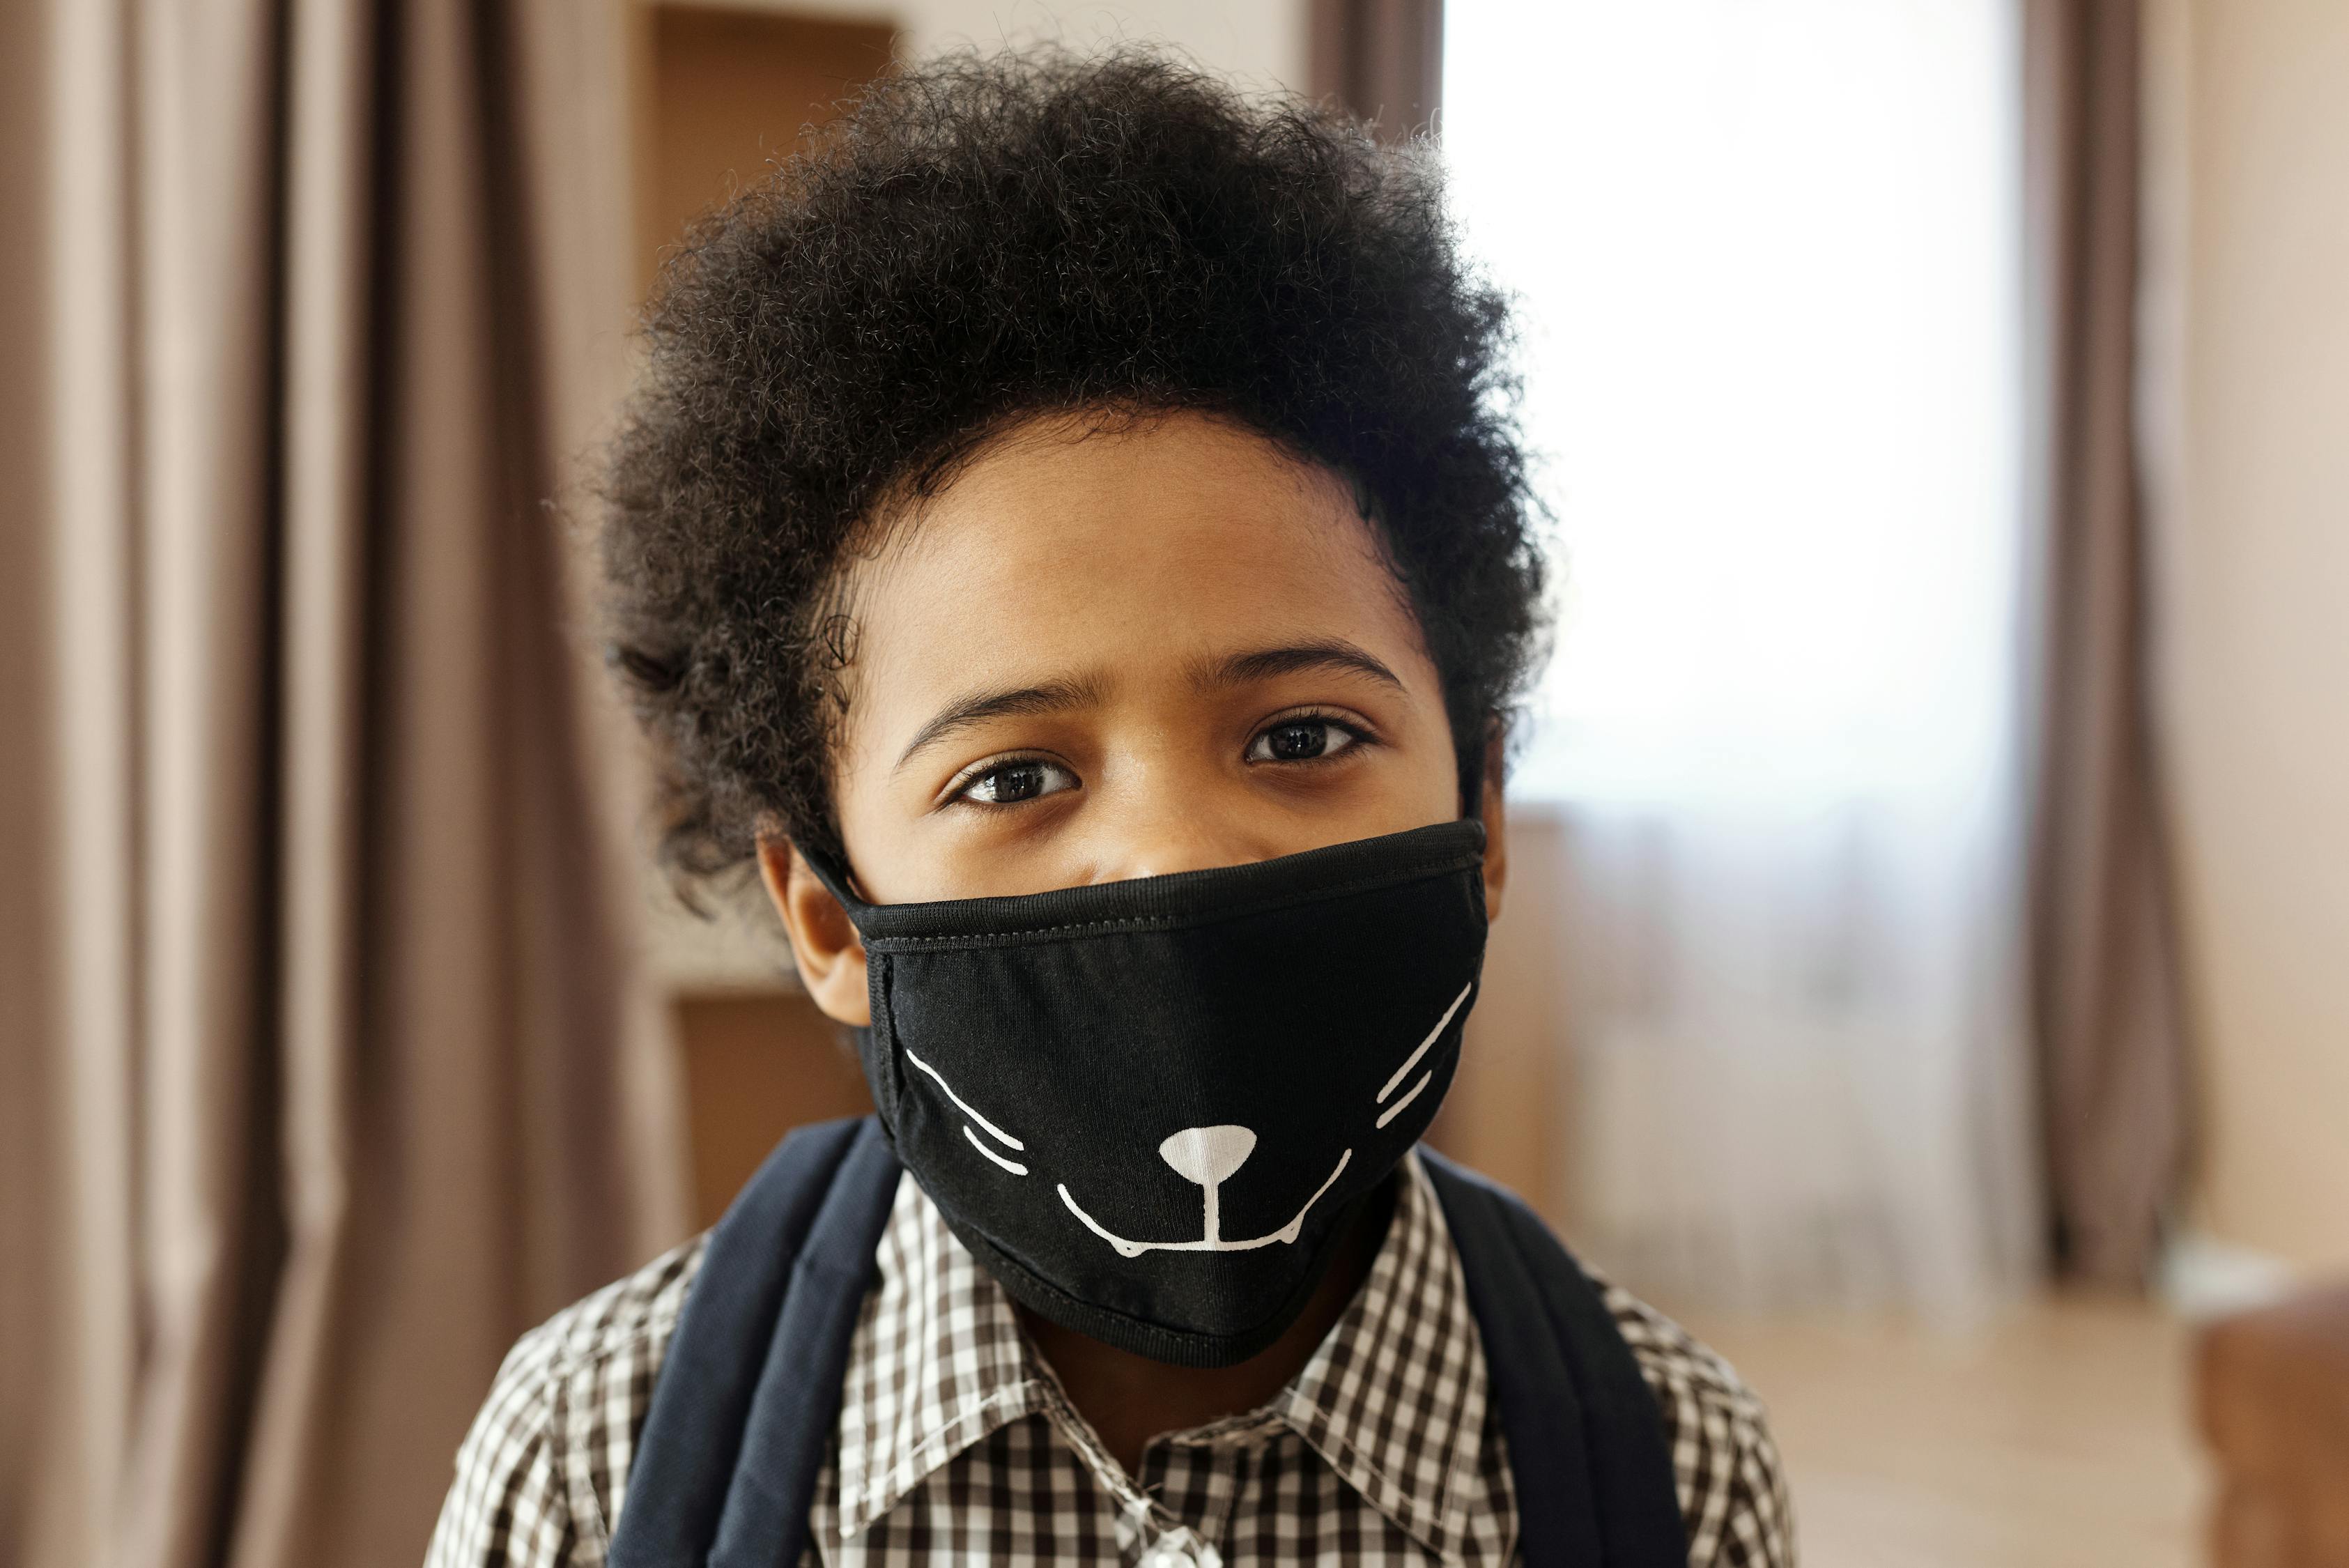 Little Boy Wearing a Face Mask With a Design · Free Stock Photo